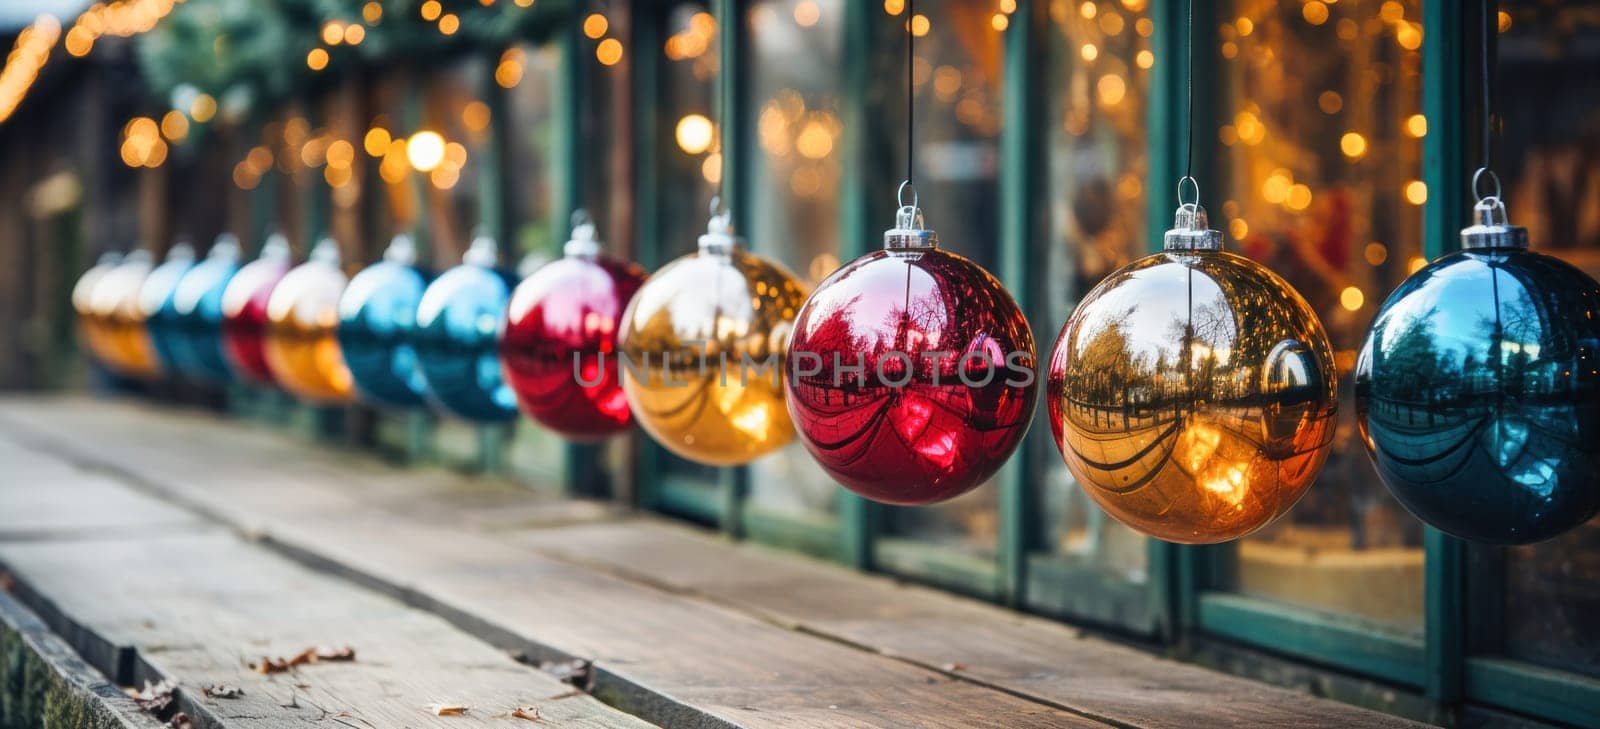 Beautiful Street Decorations with Glass Baubles for New Year's Celebration by Yurich32